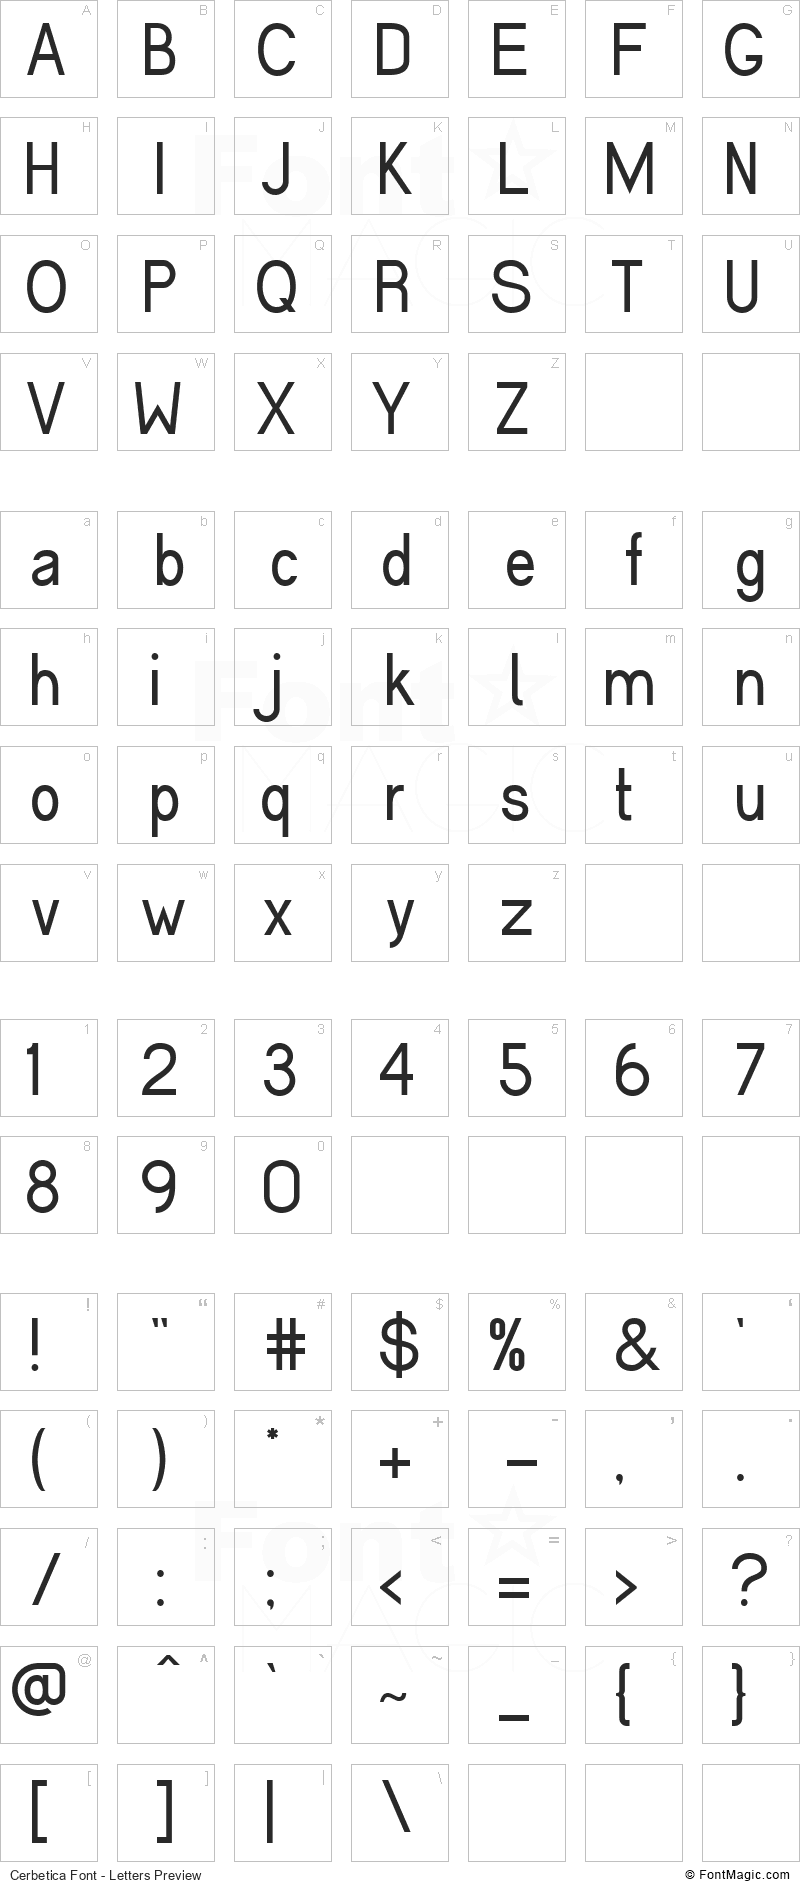 Cerbetica Font - All Latters Preview Chart